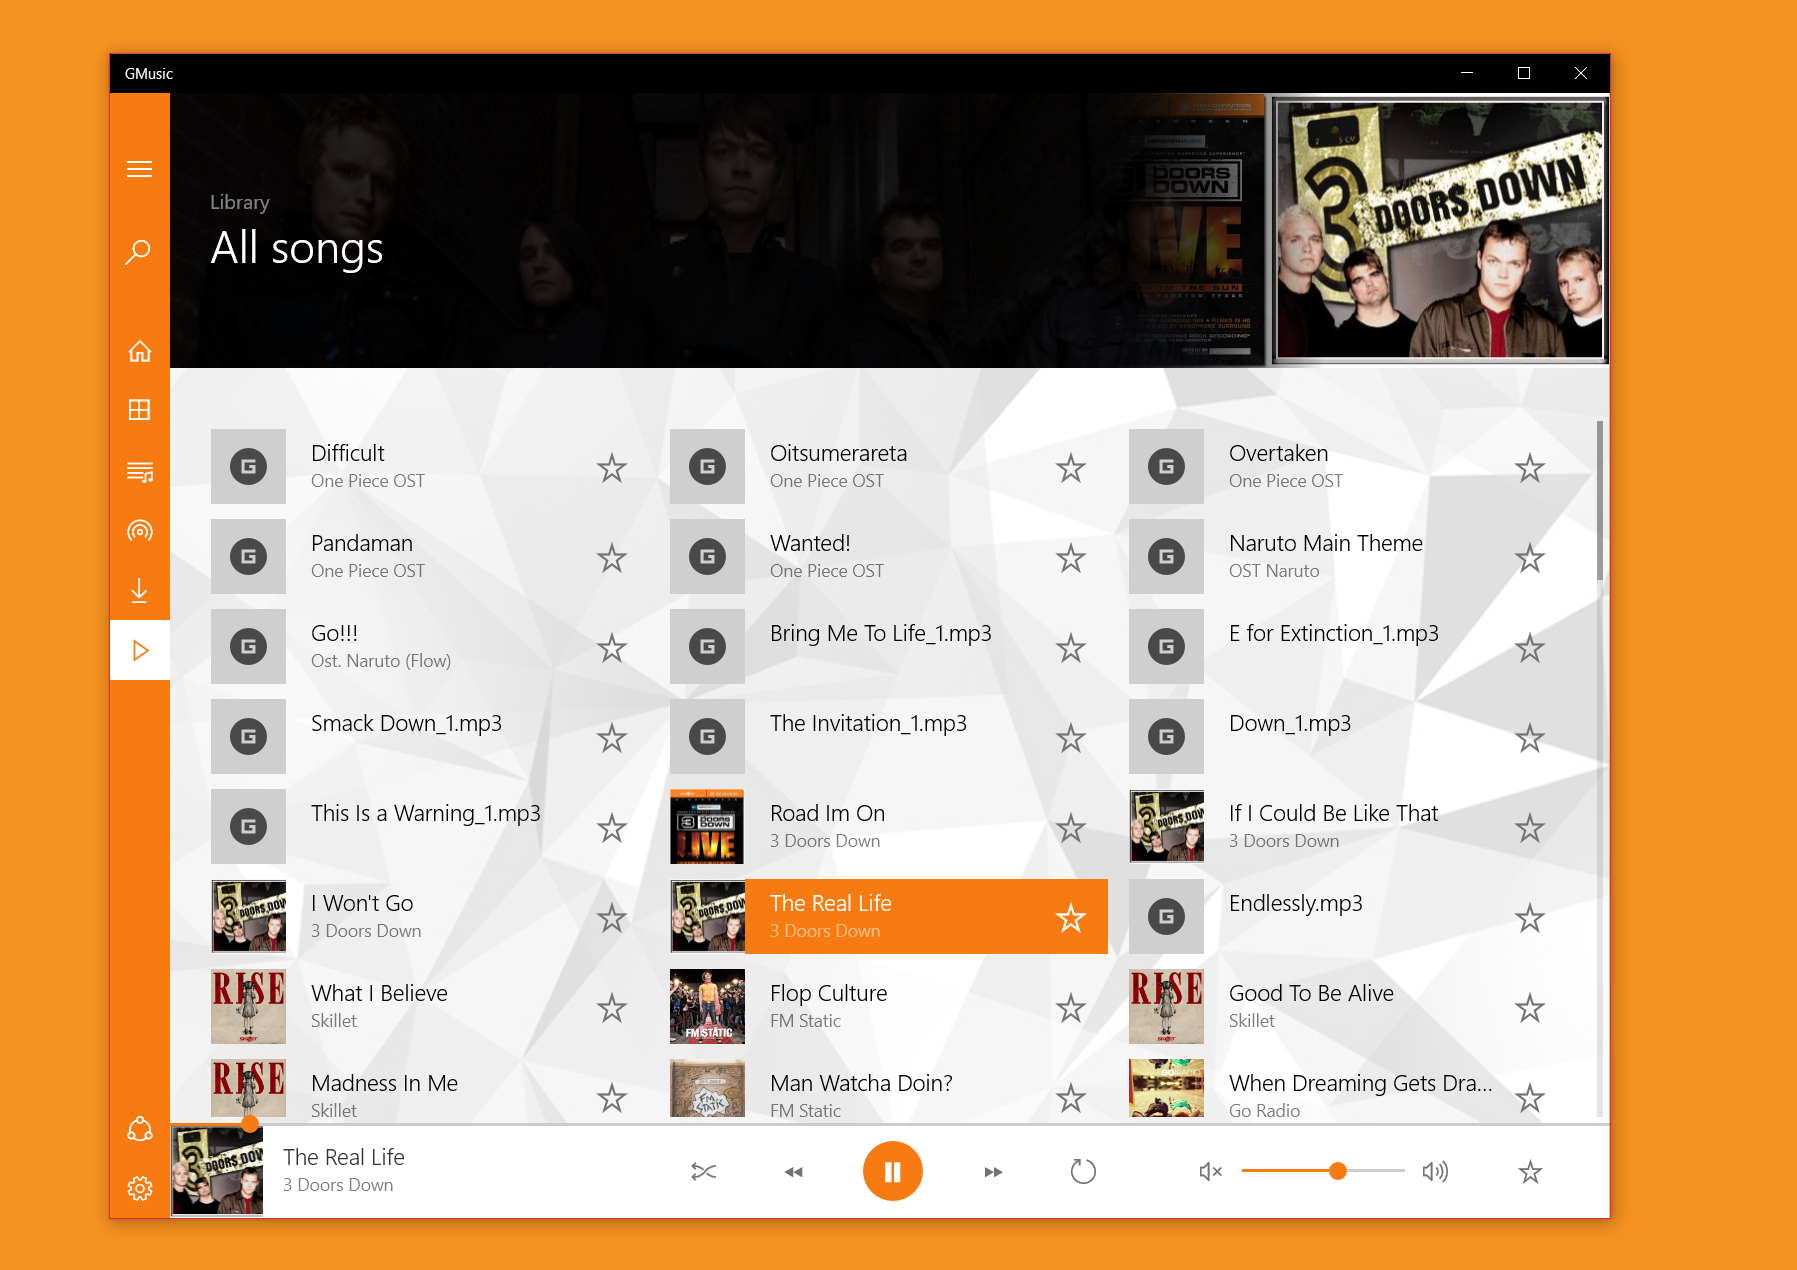 Google Play Music client GMusic becomes a universal Windows 10 app